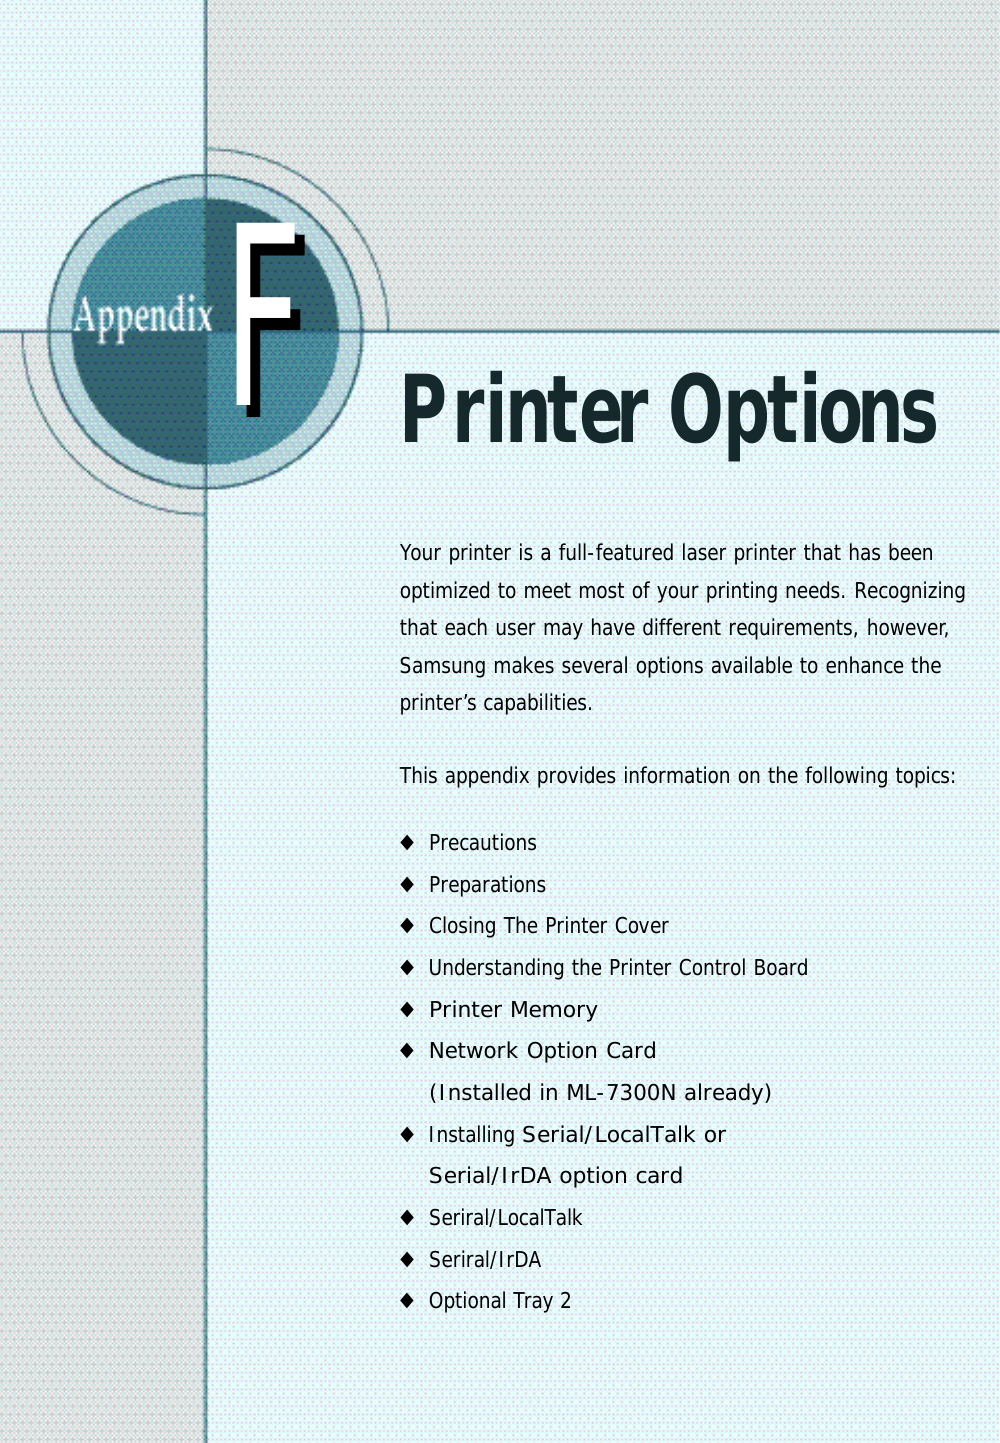 FFPrinter OptionsYour printer is a full-featured laser printer that has beenoptimized to meet most of your printing needs. Recognizingthat each user may have different requirements, however,Samsung makes several options available to enhance theprinter’s capabilities.This appendix provides information on the following topics:◆Precautions◆Preparations◆Closing The Printer Cover◆Understanding the Printer Control Board◆Printer Memory◆Network Option Card (Installed in ML-7300N already)◆Installing Serial/LocalTalk or Serial/IrDA option card◆Seriral/LocalTalk◆Seriral/IrDA◆Optional Tray 2